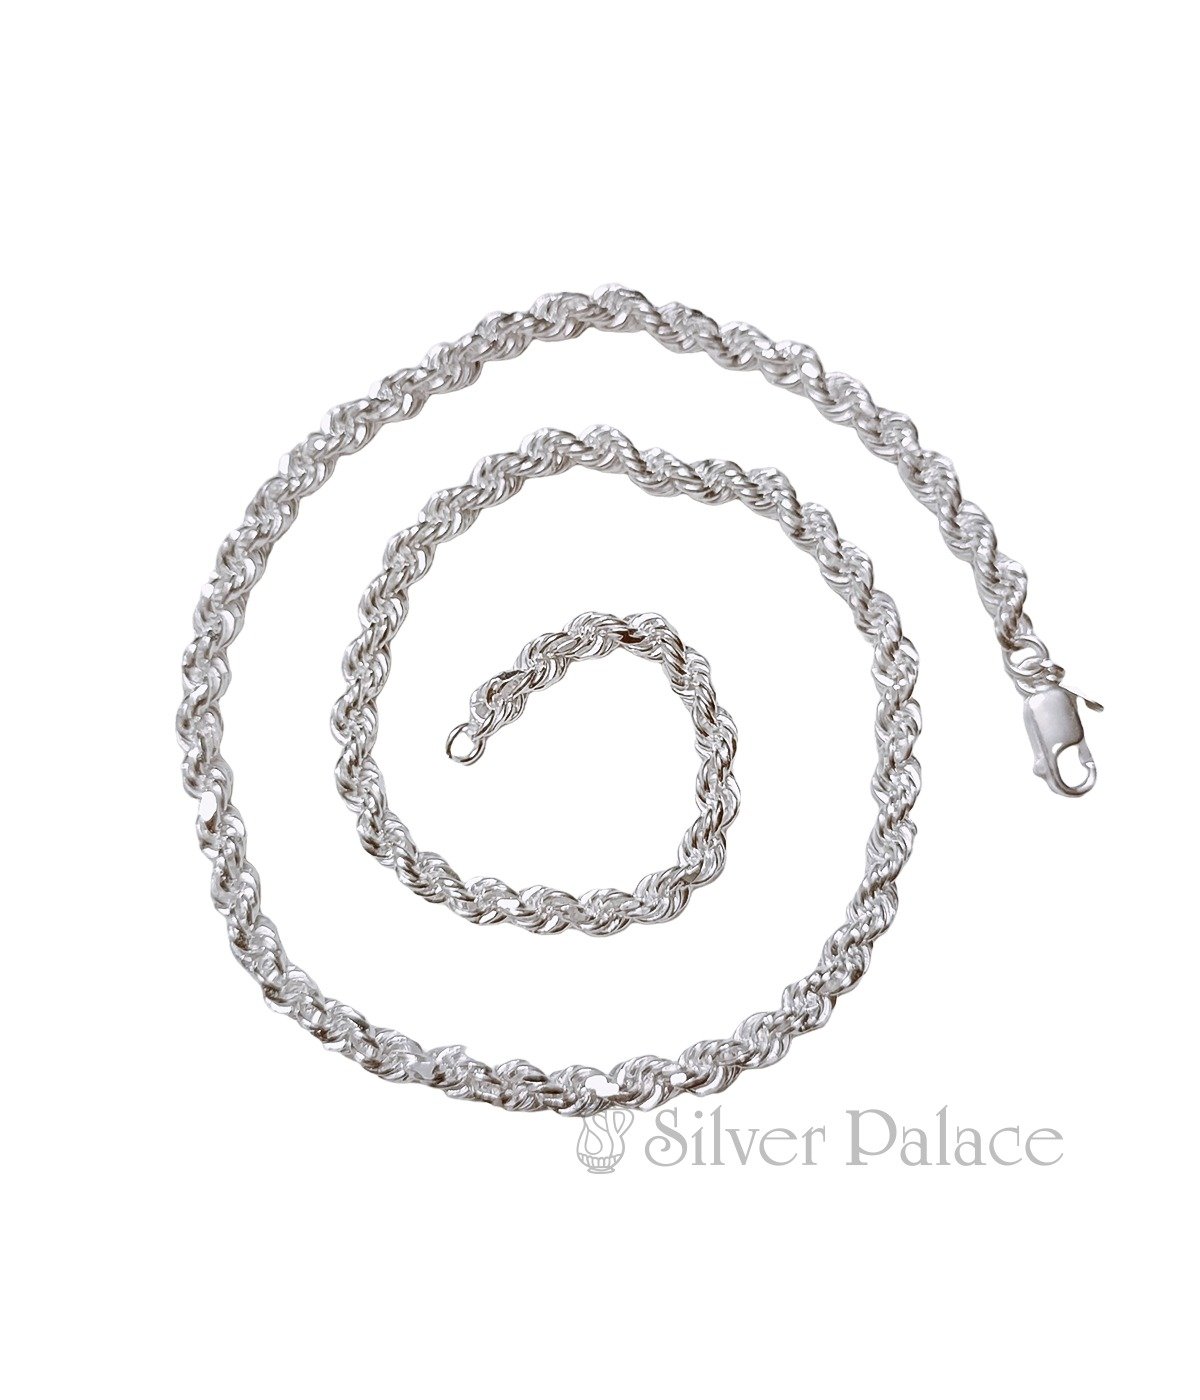 TWISTED DESIGN SILVER CHAIN FOR MEN